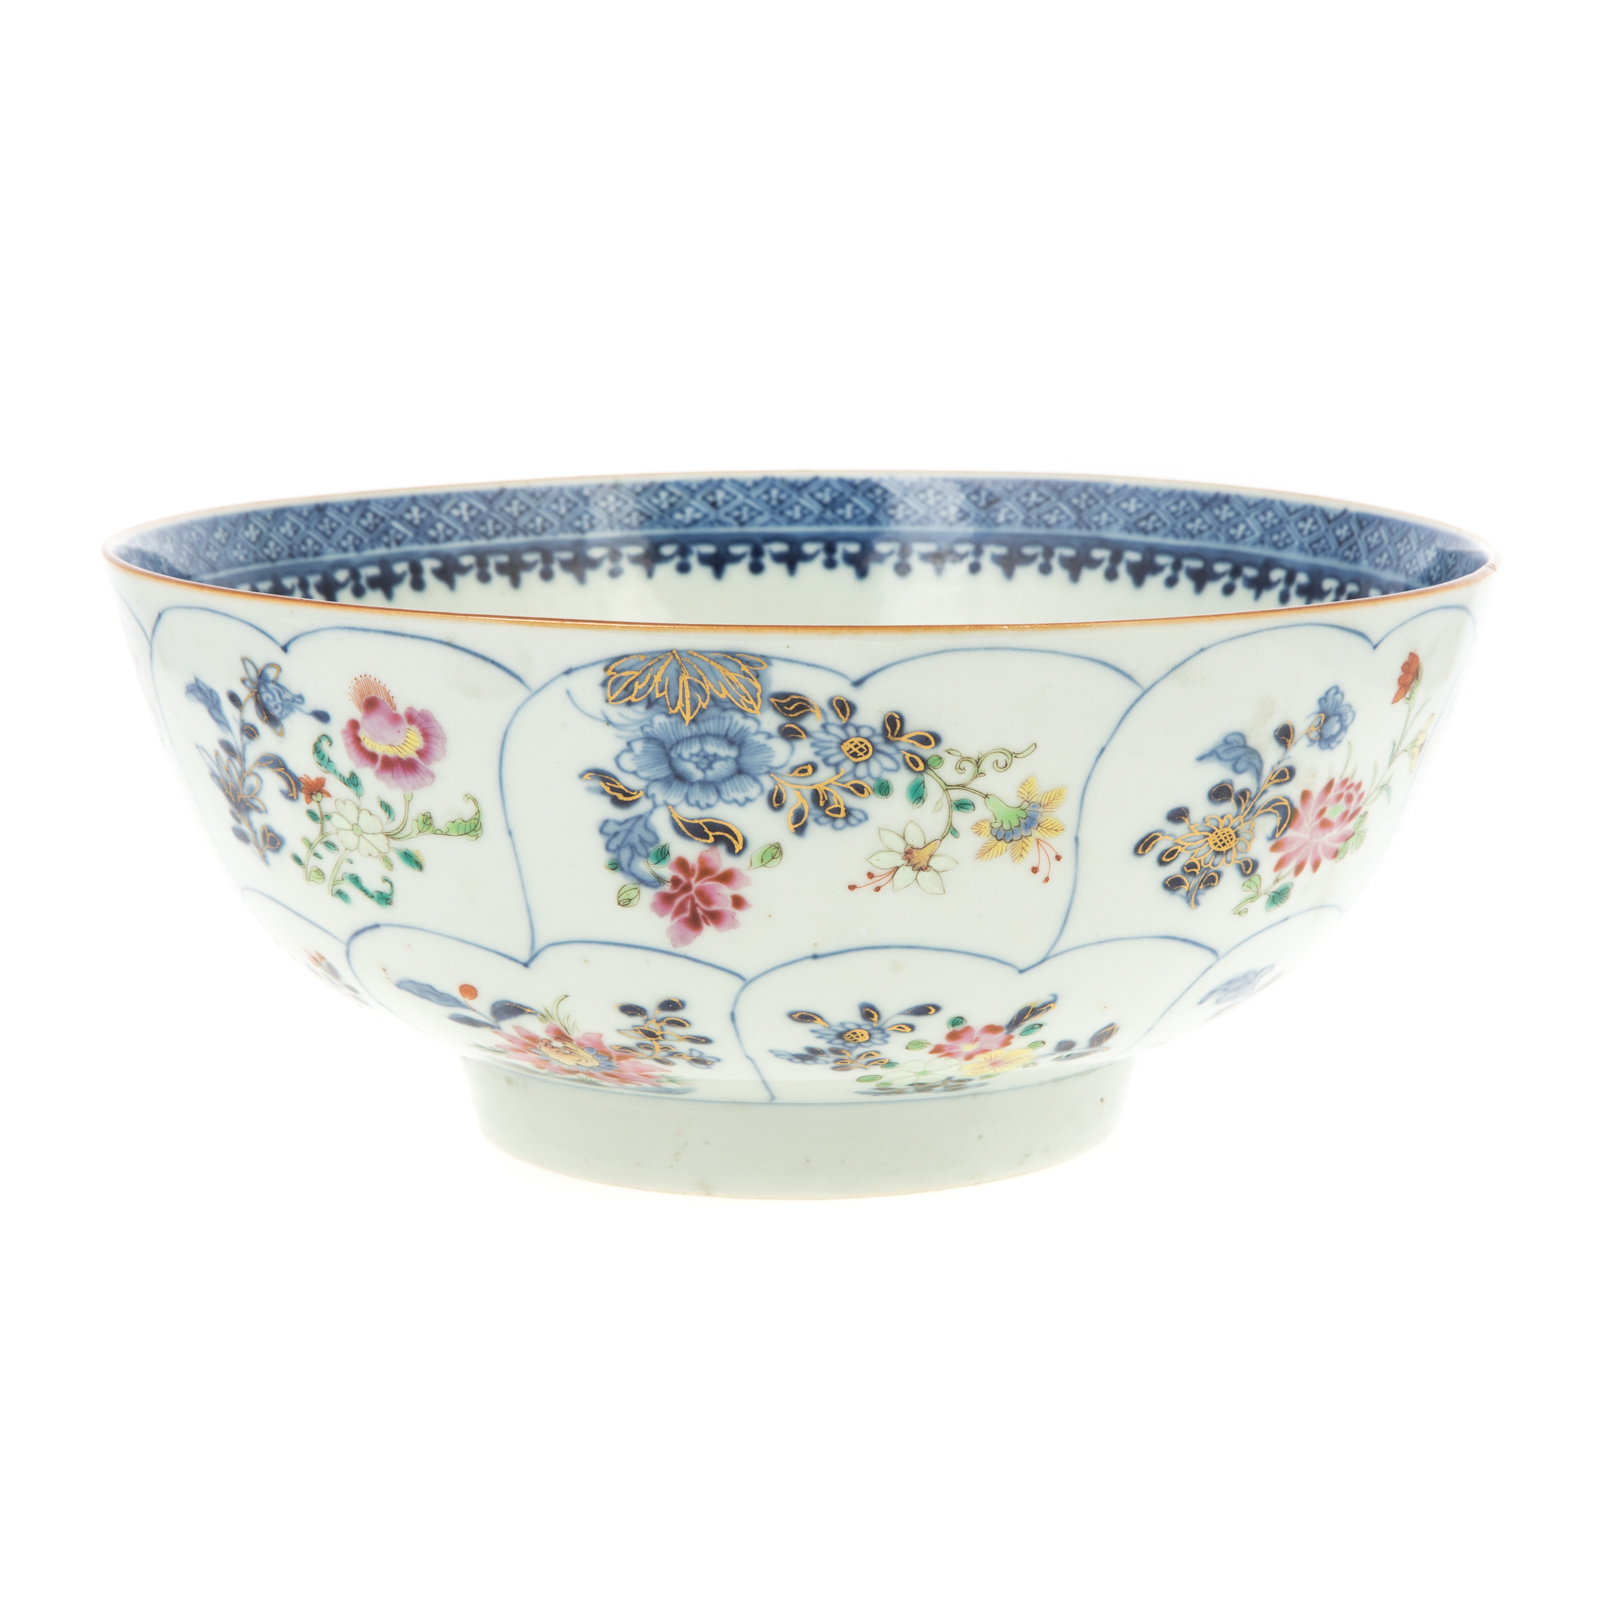 CHINESE EXPORT FAMILLE ROSE BOWL 338f69